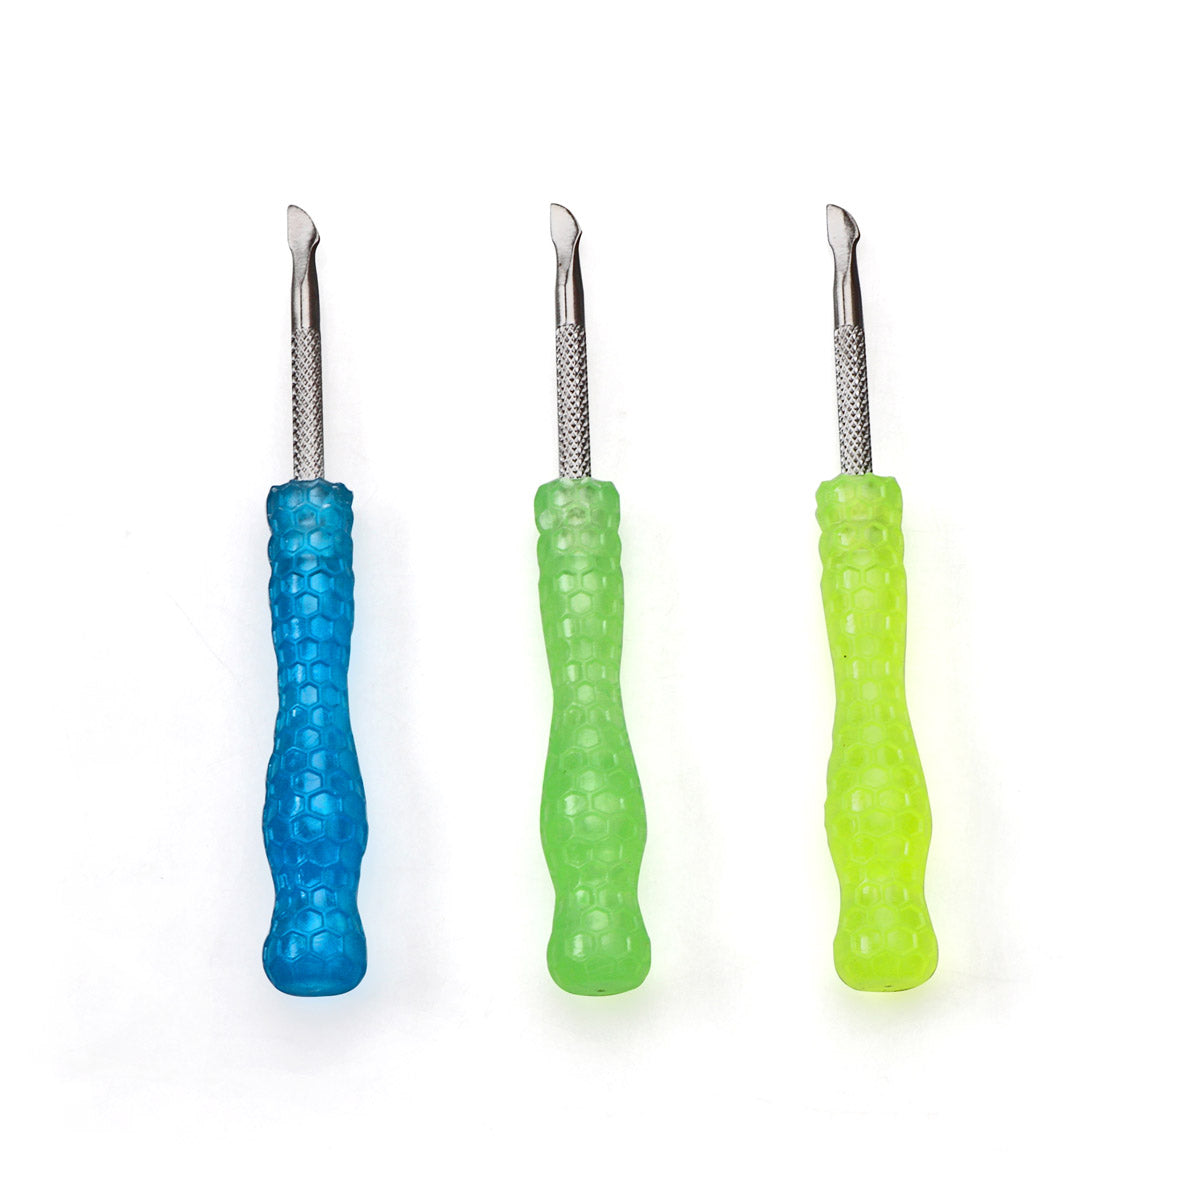 Three Glow in the Dark Resin Handle Dab Tools by The Stash Shack in blue, green, and yellow